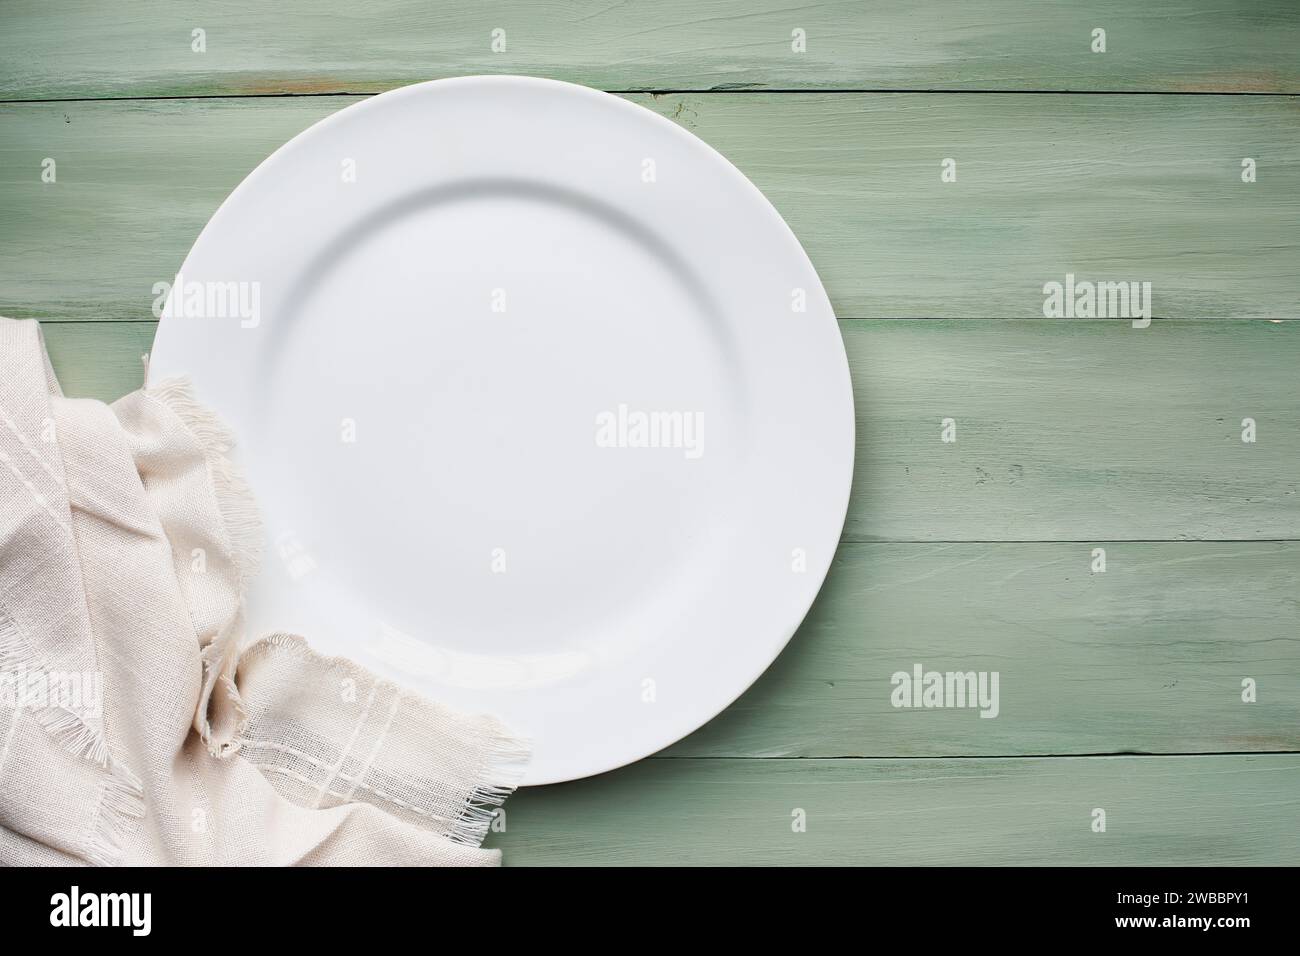 An empty white plate with napkin over a rustic green spring table, shot from flat lay or table top view position. Free space for text. Stock Photo